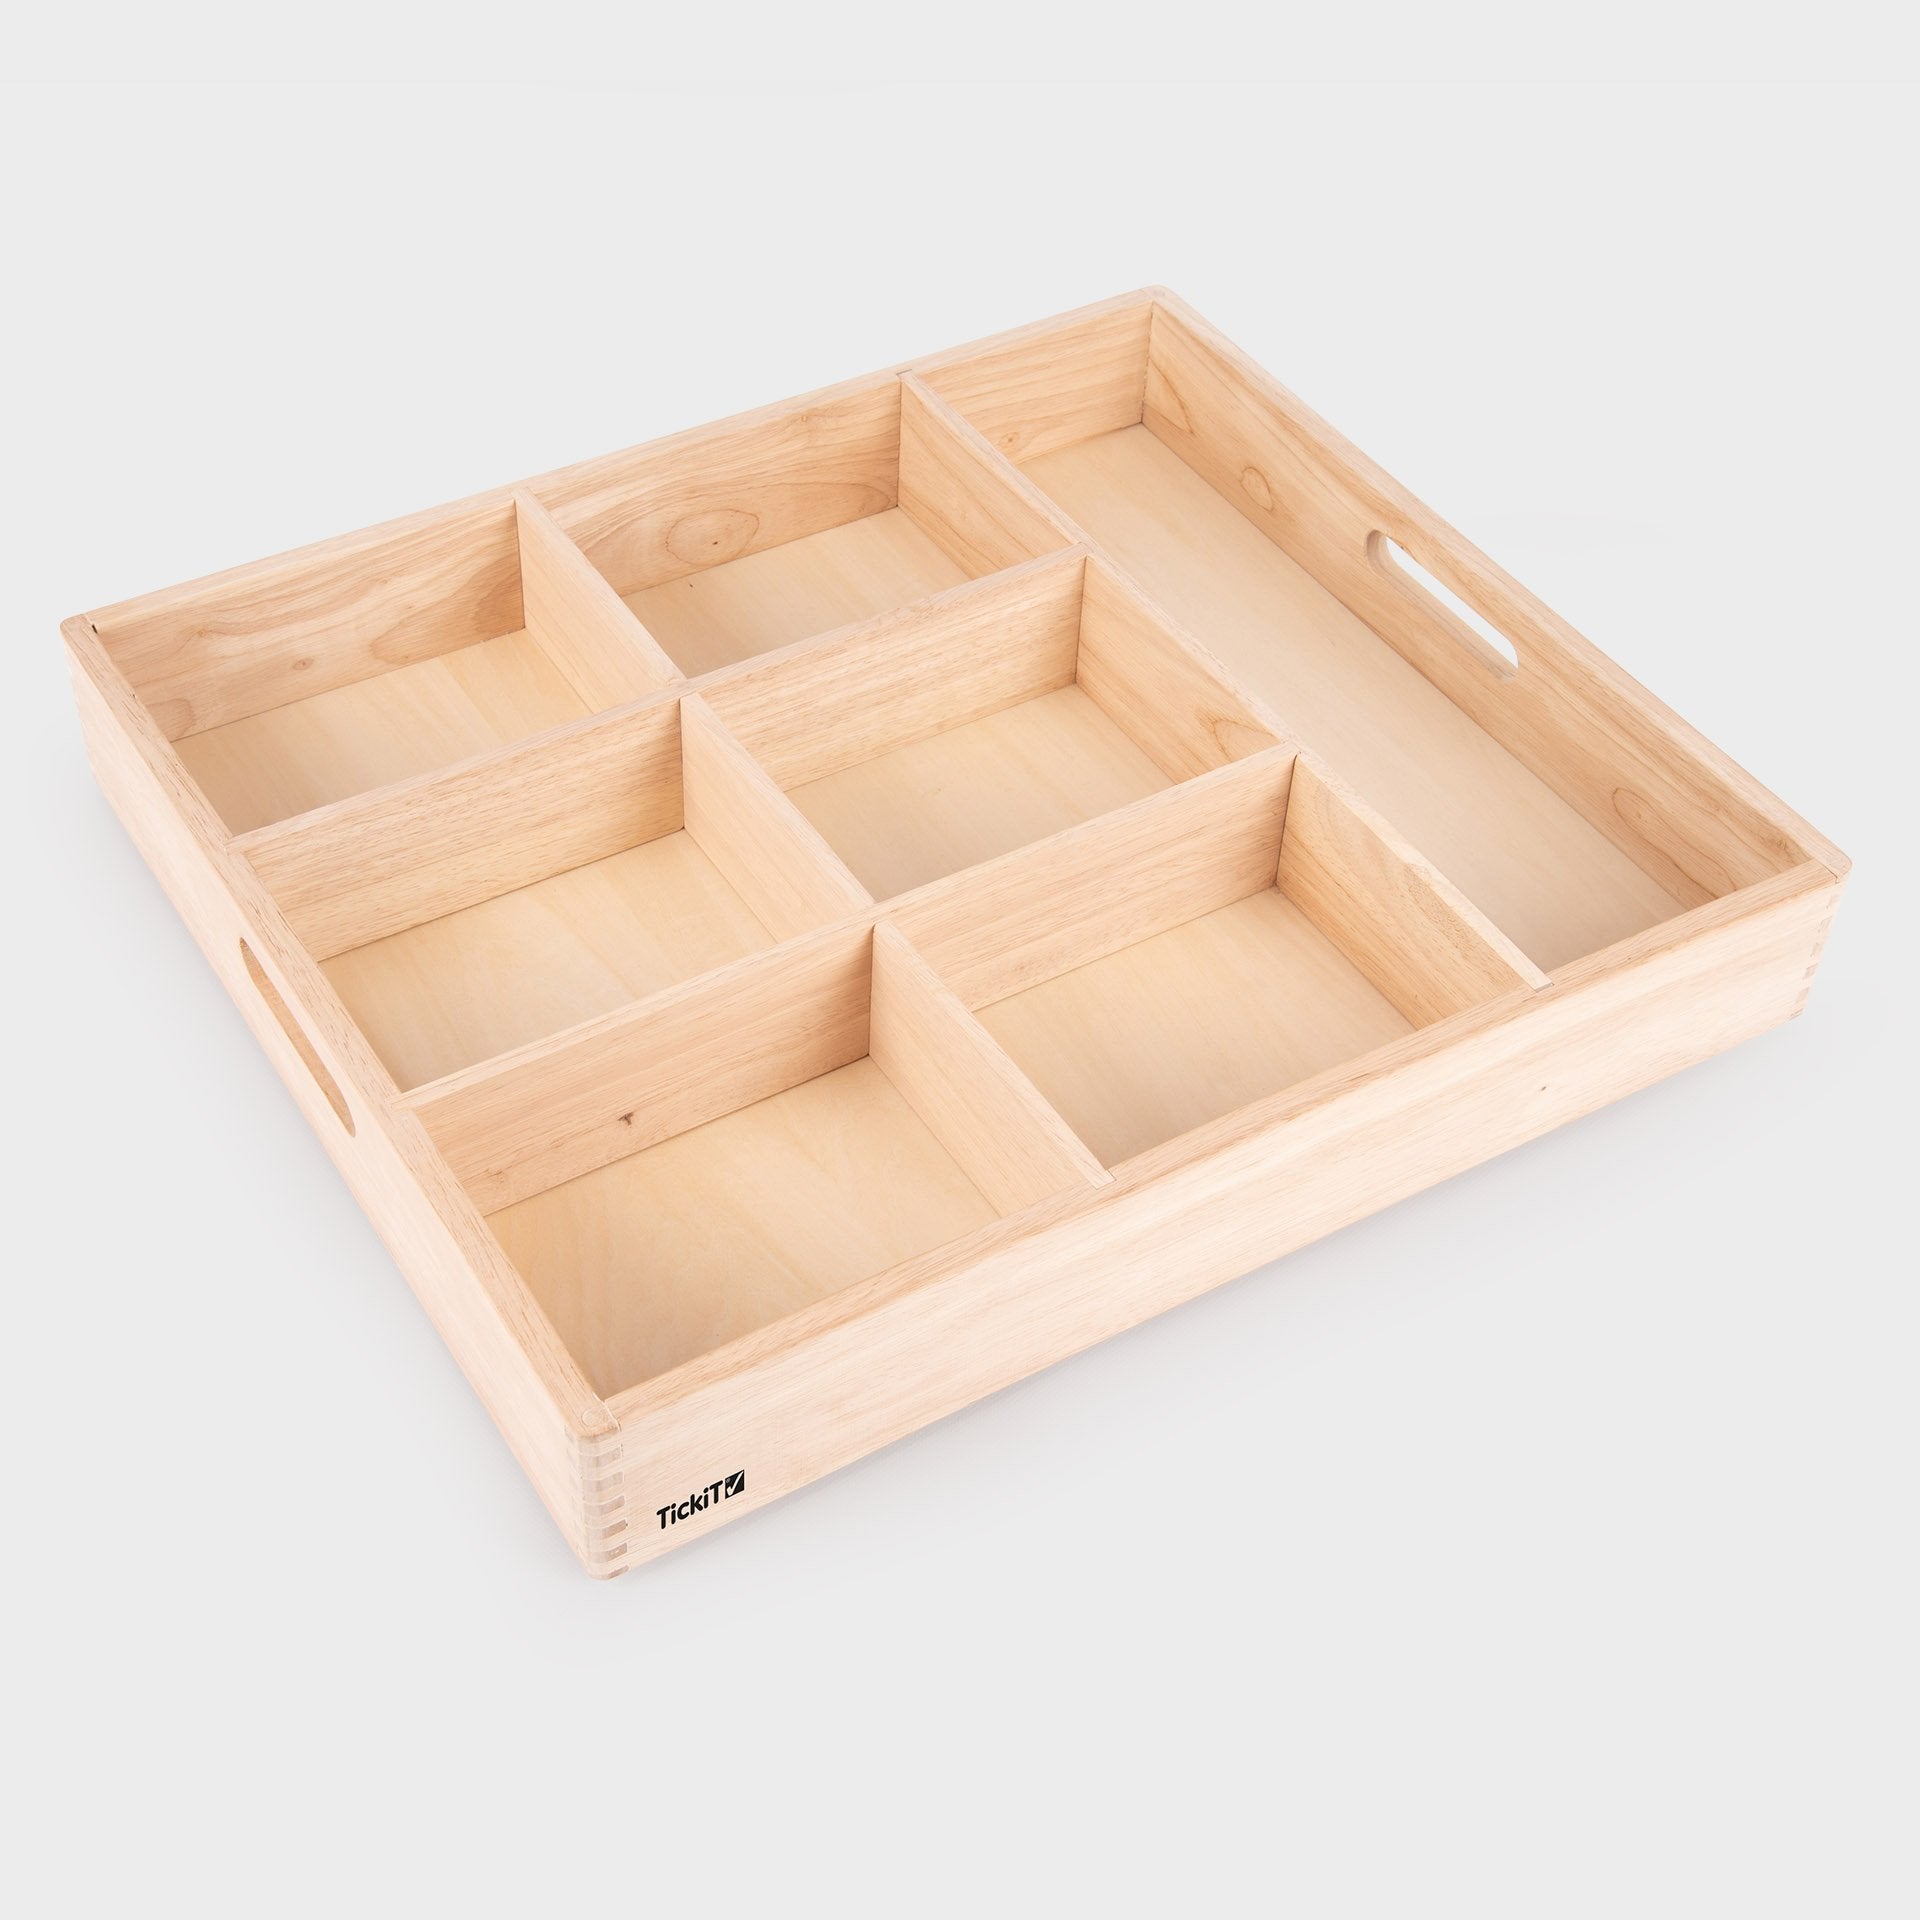 Wooden Sorting Tray 7 Way, Introducing the Wooden Sorting Tray 7 Way — a brilliant organizing solution and an essential learning aid for young minds! This exquisitely crafted tray is built from high-quality, durable beechwood and features seven separate storage compartments for versatile use. It is specifically designed to encourage creative play, critical thinking, and organization skills in your little ones.The tray measures an ample yet compact size, ideal for containing a multitude of small objects with